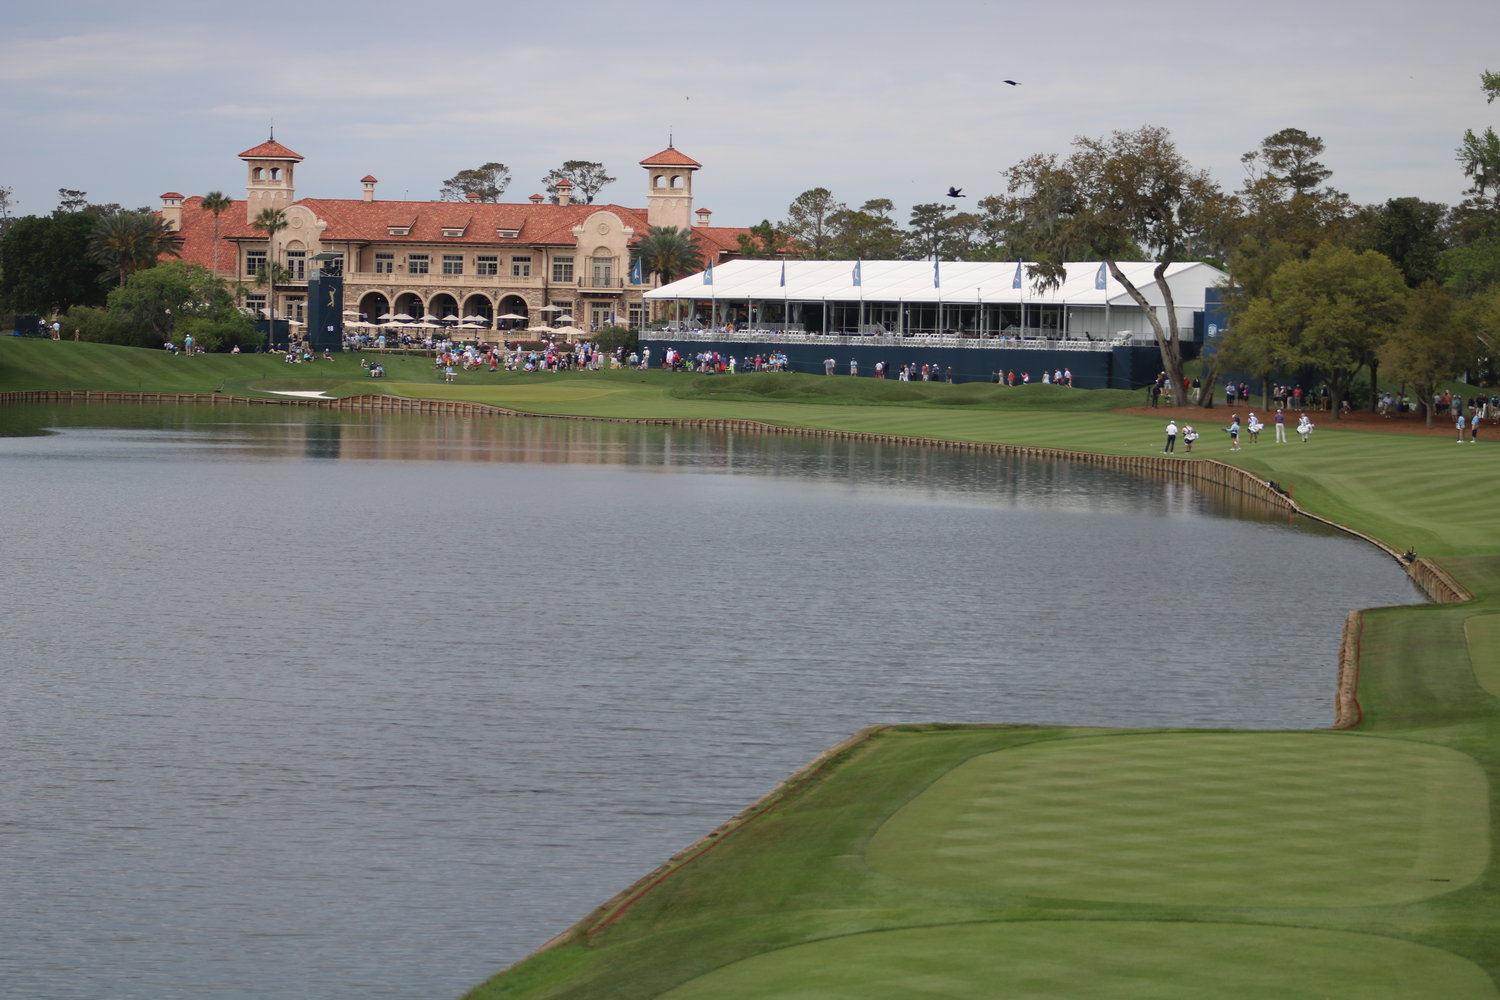 The 18th hole at TPC Sawgrass is waiting to be a deciding factor as the rounds go by at the 2023 THE PLAYERS Championship.